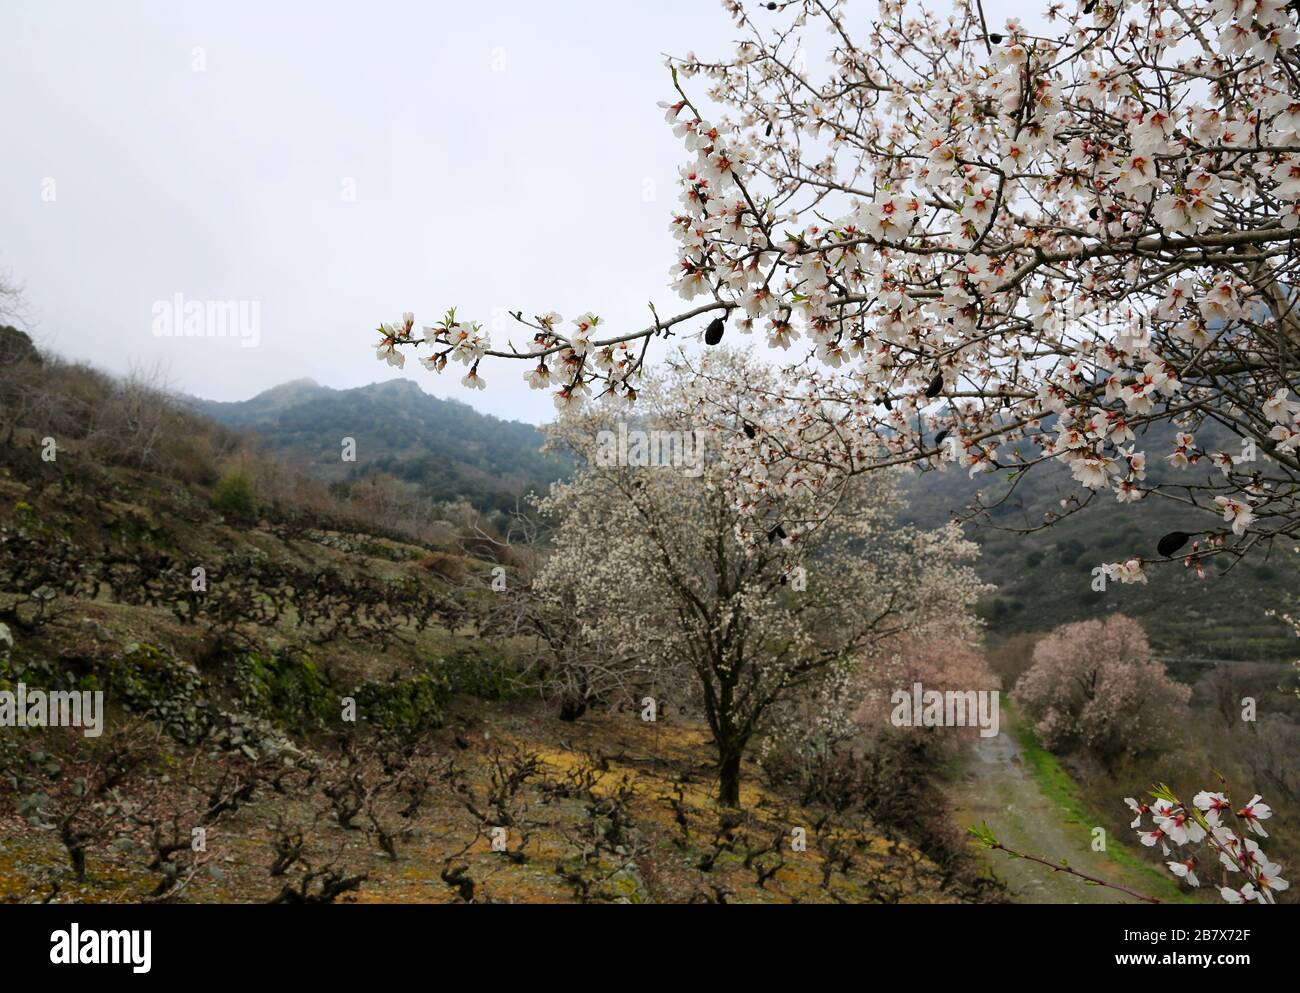 Almond trees in bloom near vineyards in Troodos Mountains in Cyprus. Stock Photo